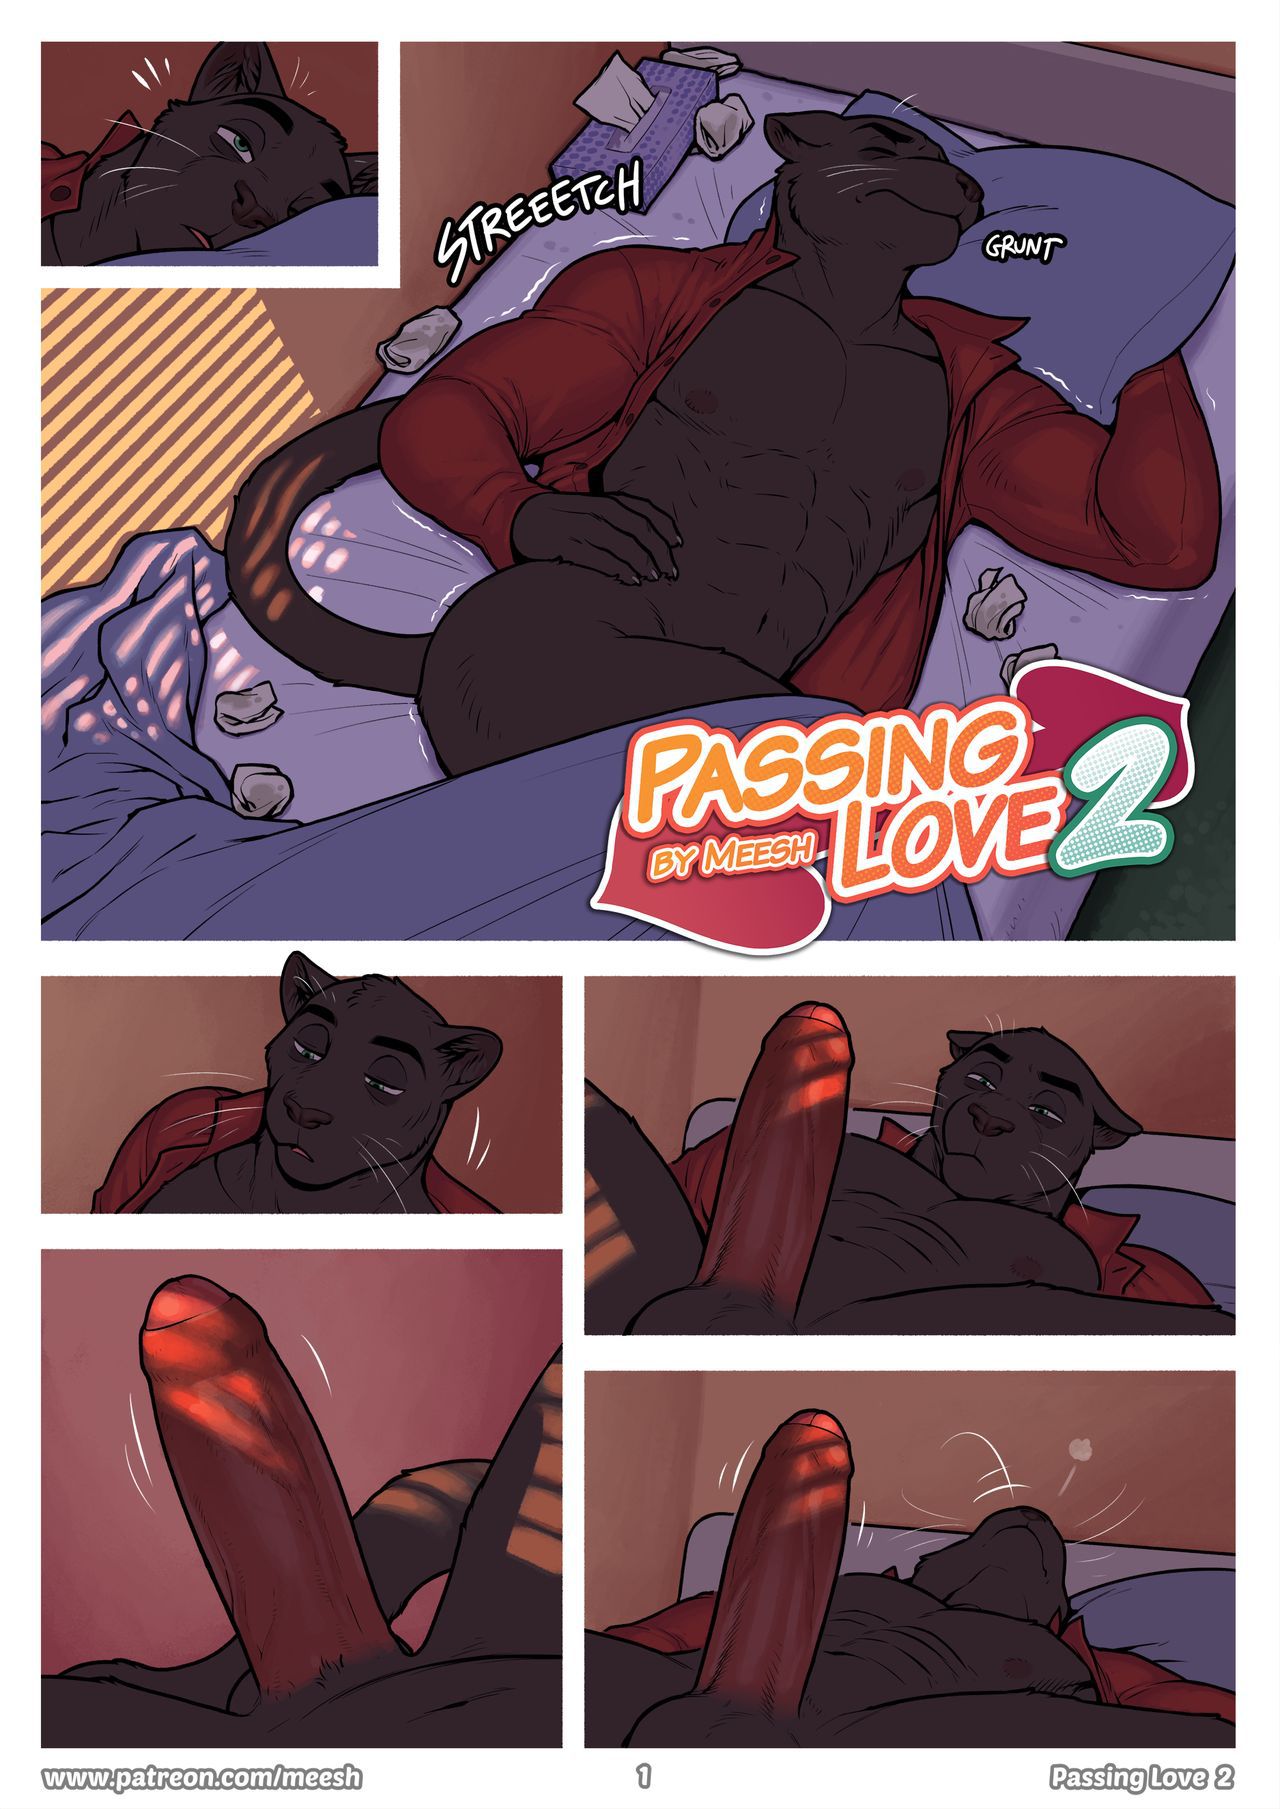 [Meesh] Passing Love 2 (Ongoing) 1